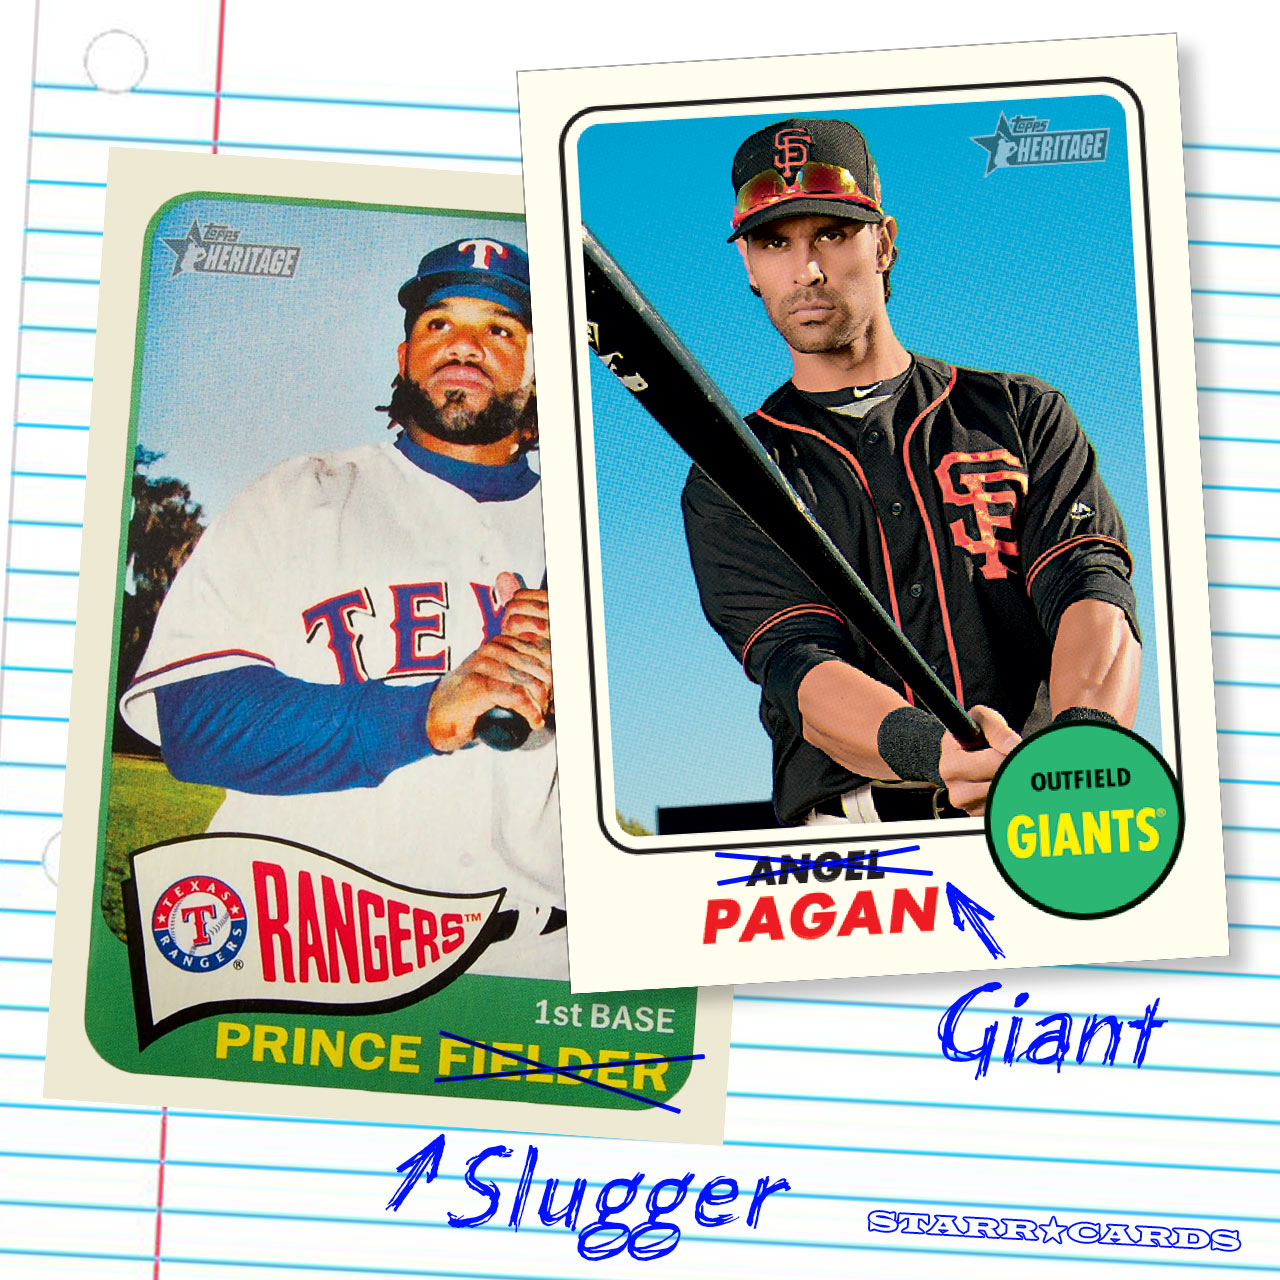 Prince Fielder, Angel Pagan and other misleadingly named MLB players